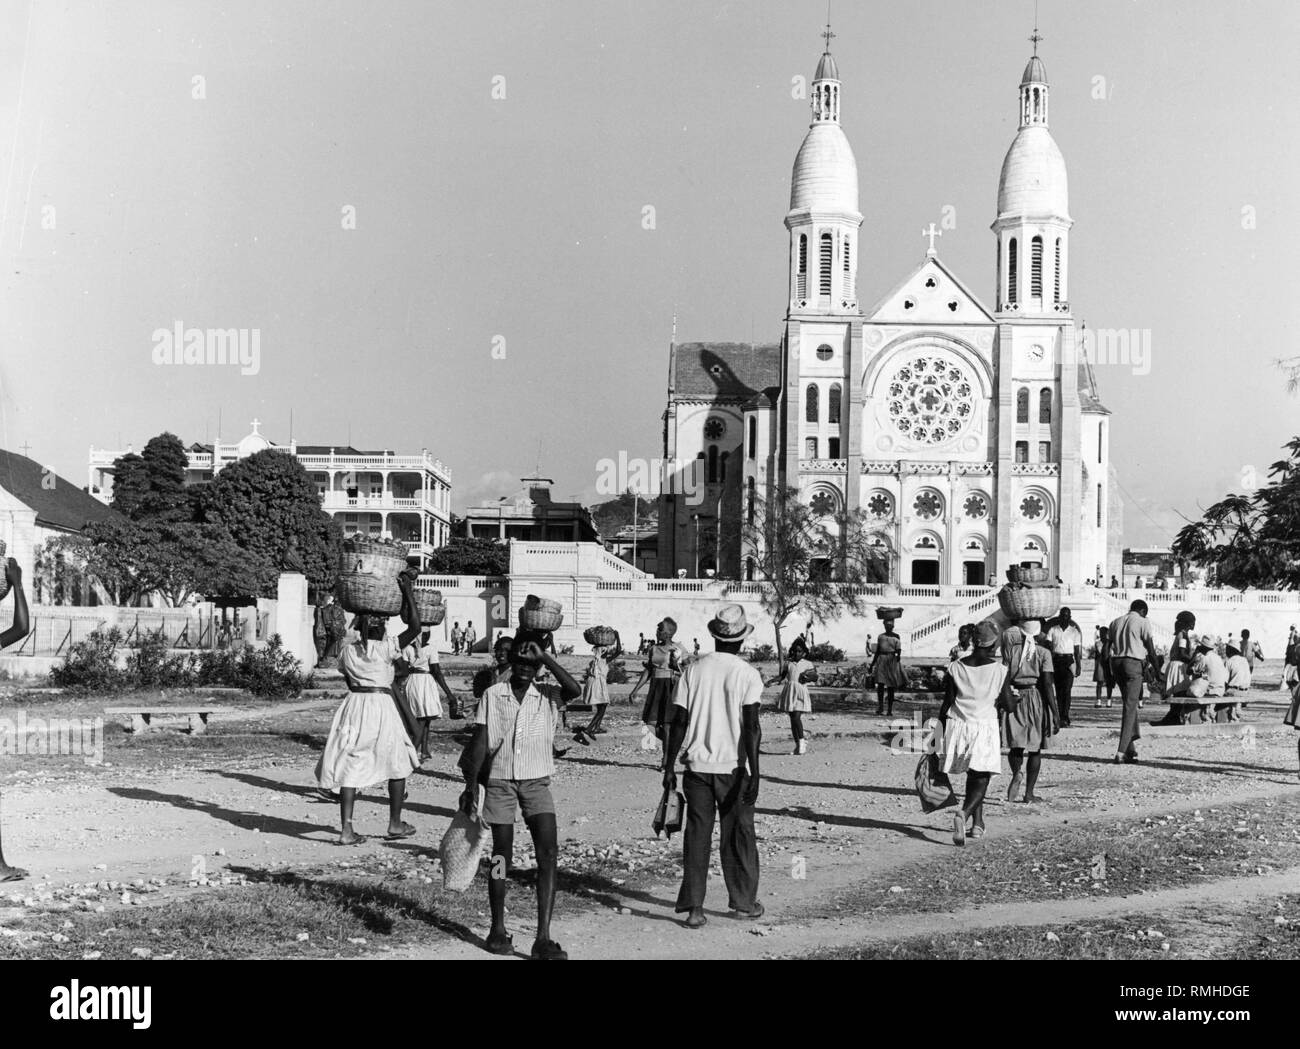 people-in-the-square-in-front-of-the-notre-dame-cathedral-in-port-au-prince-undated-photo-probably-from-the-1950s-RMHDGE.jpg